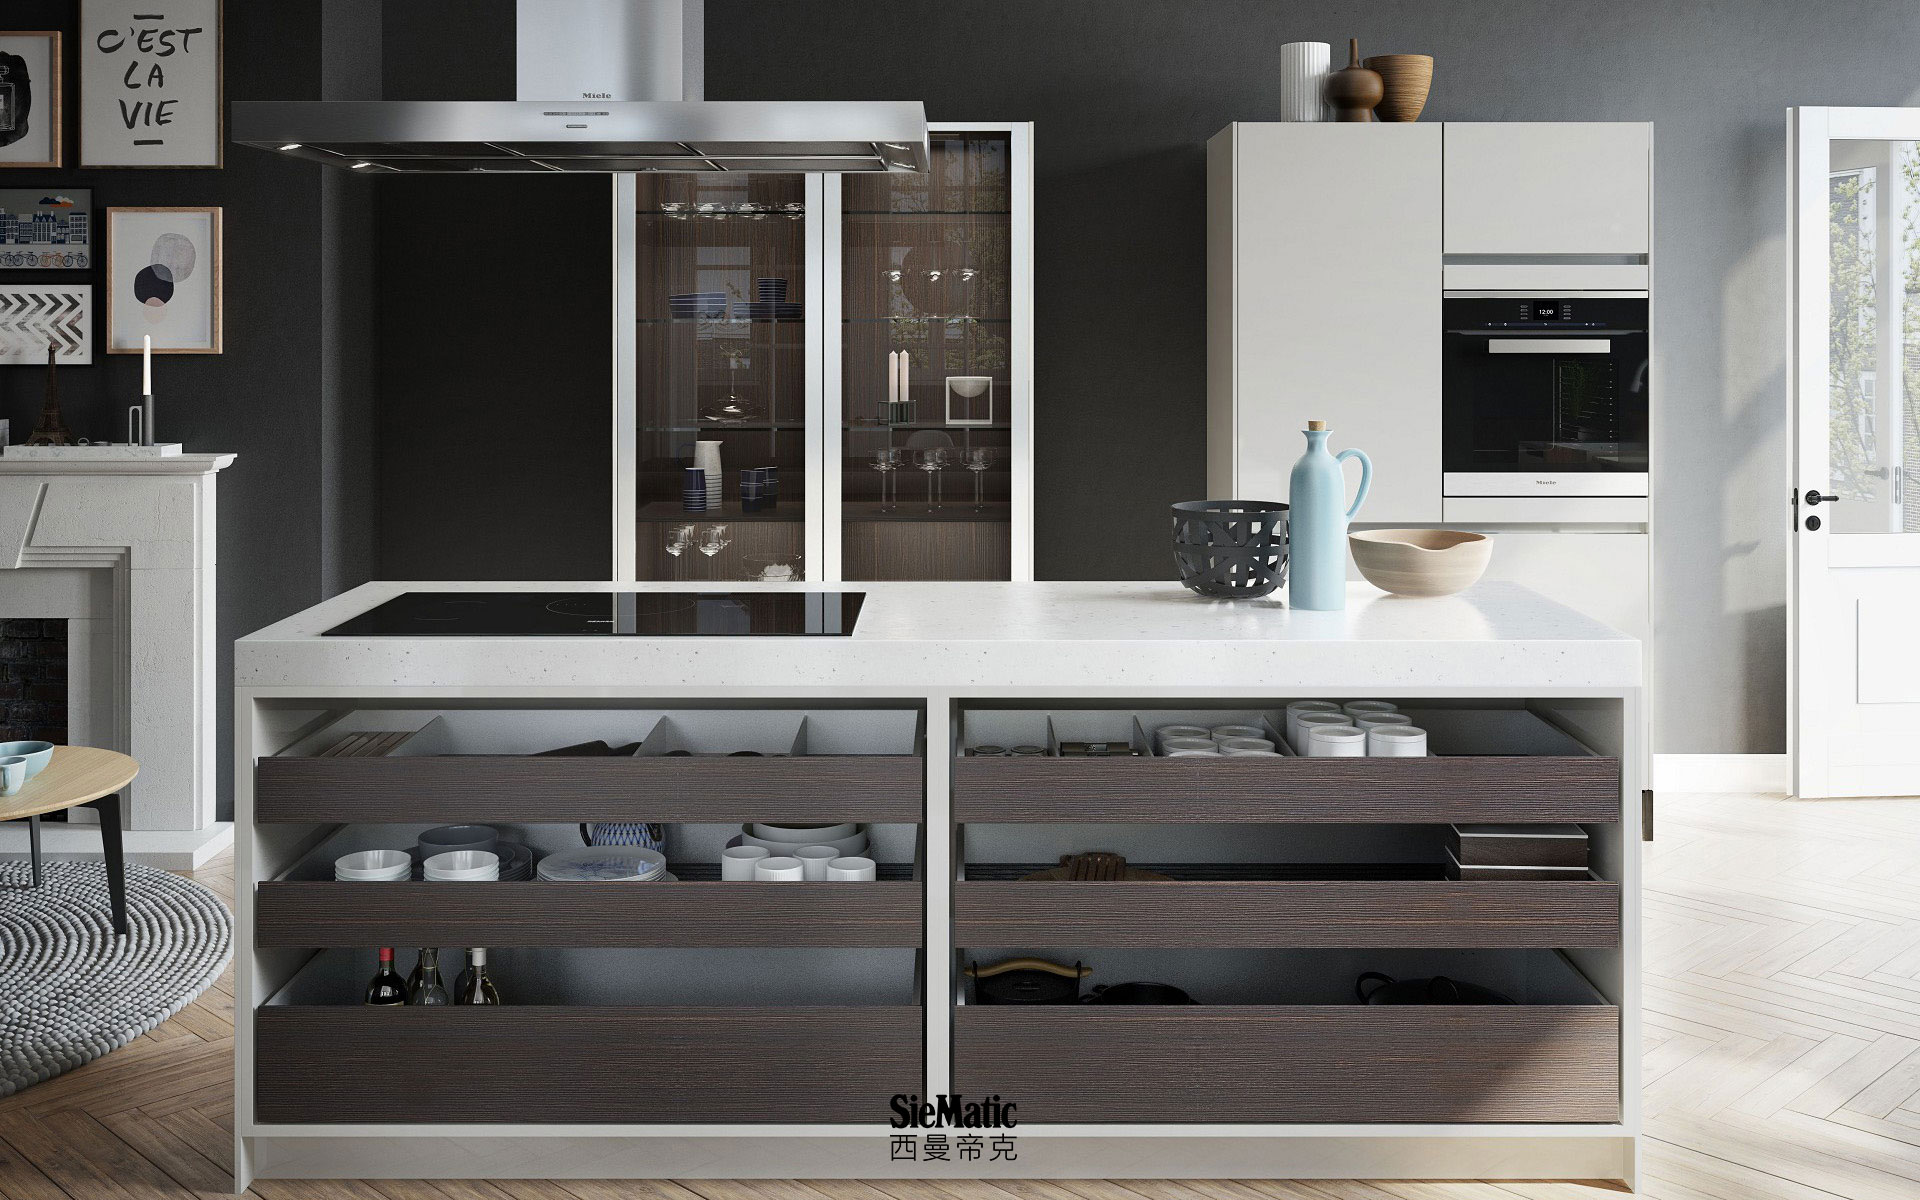 SieMatic kitchen island from the Urban style collection with countertop made from composite stone